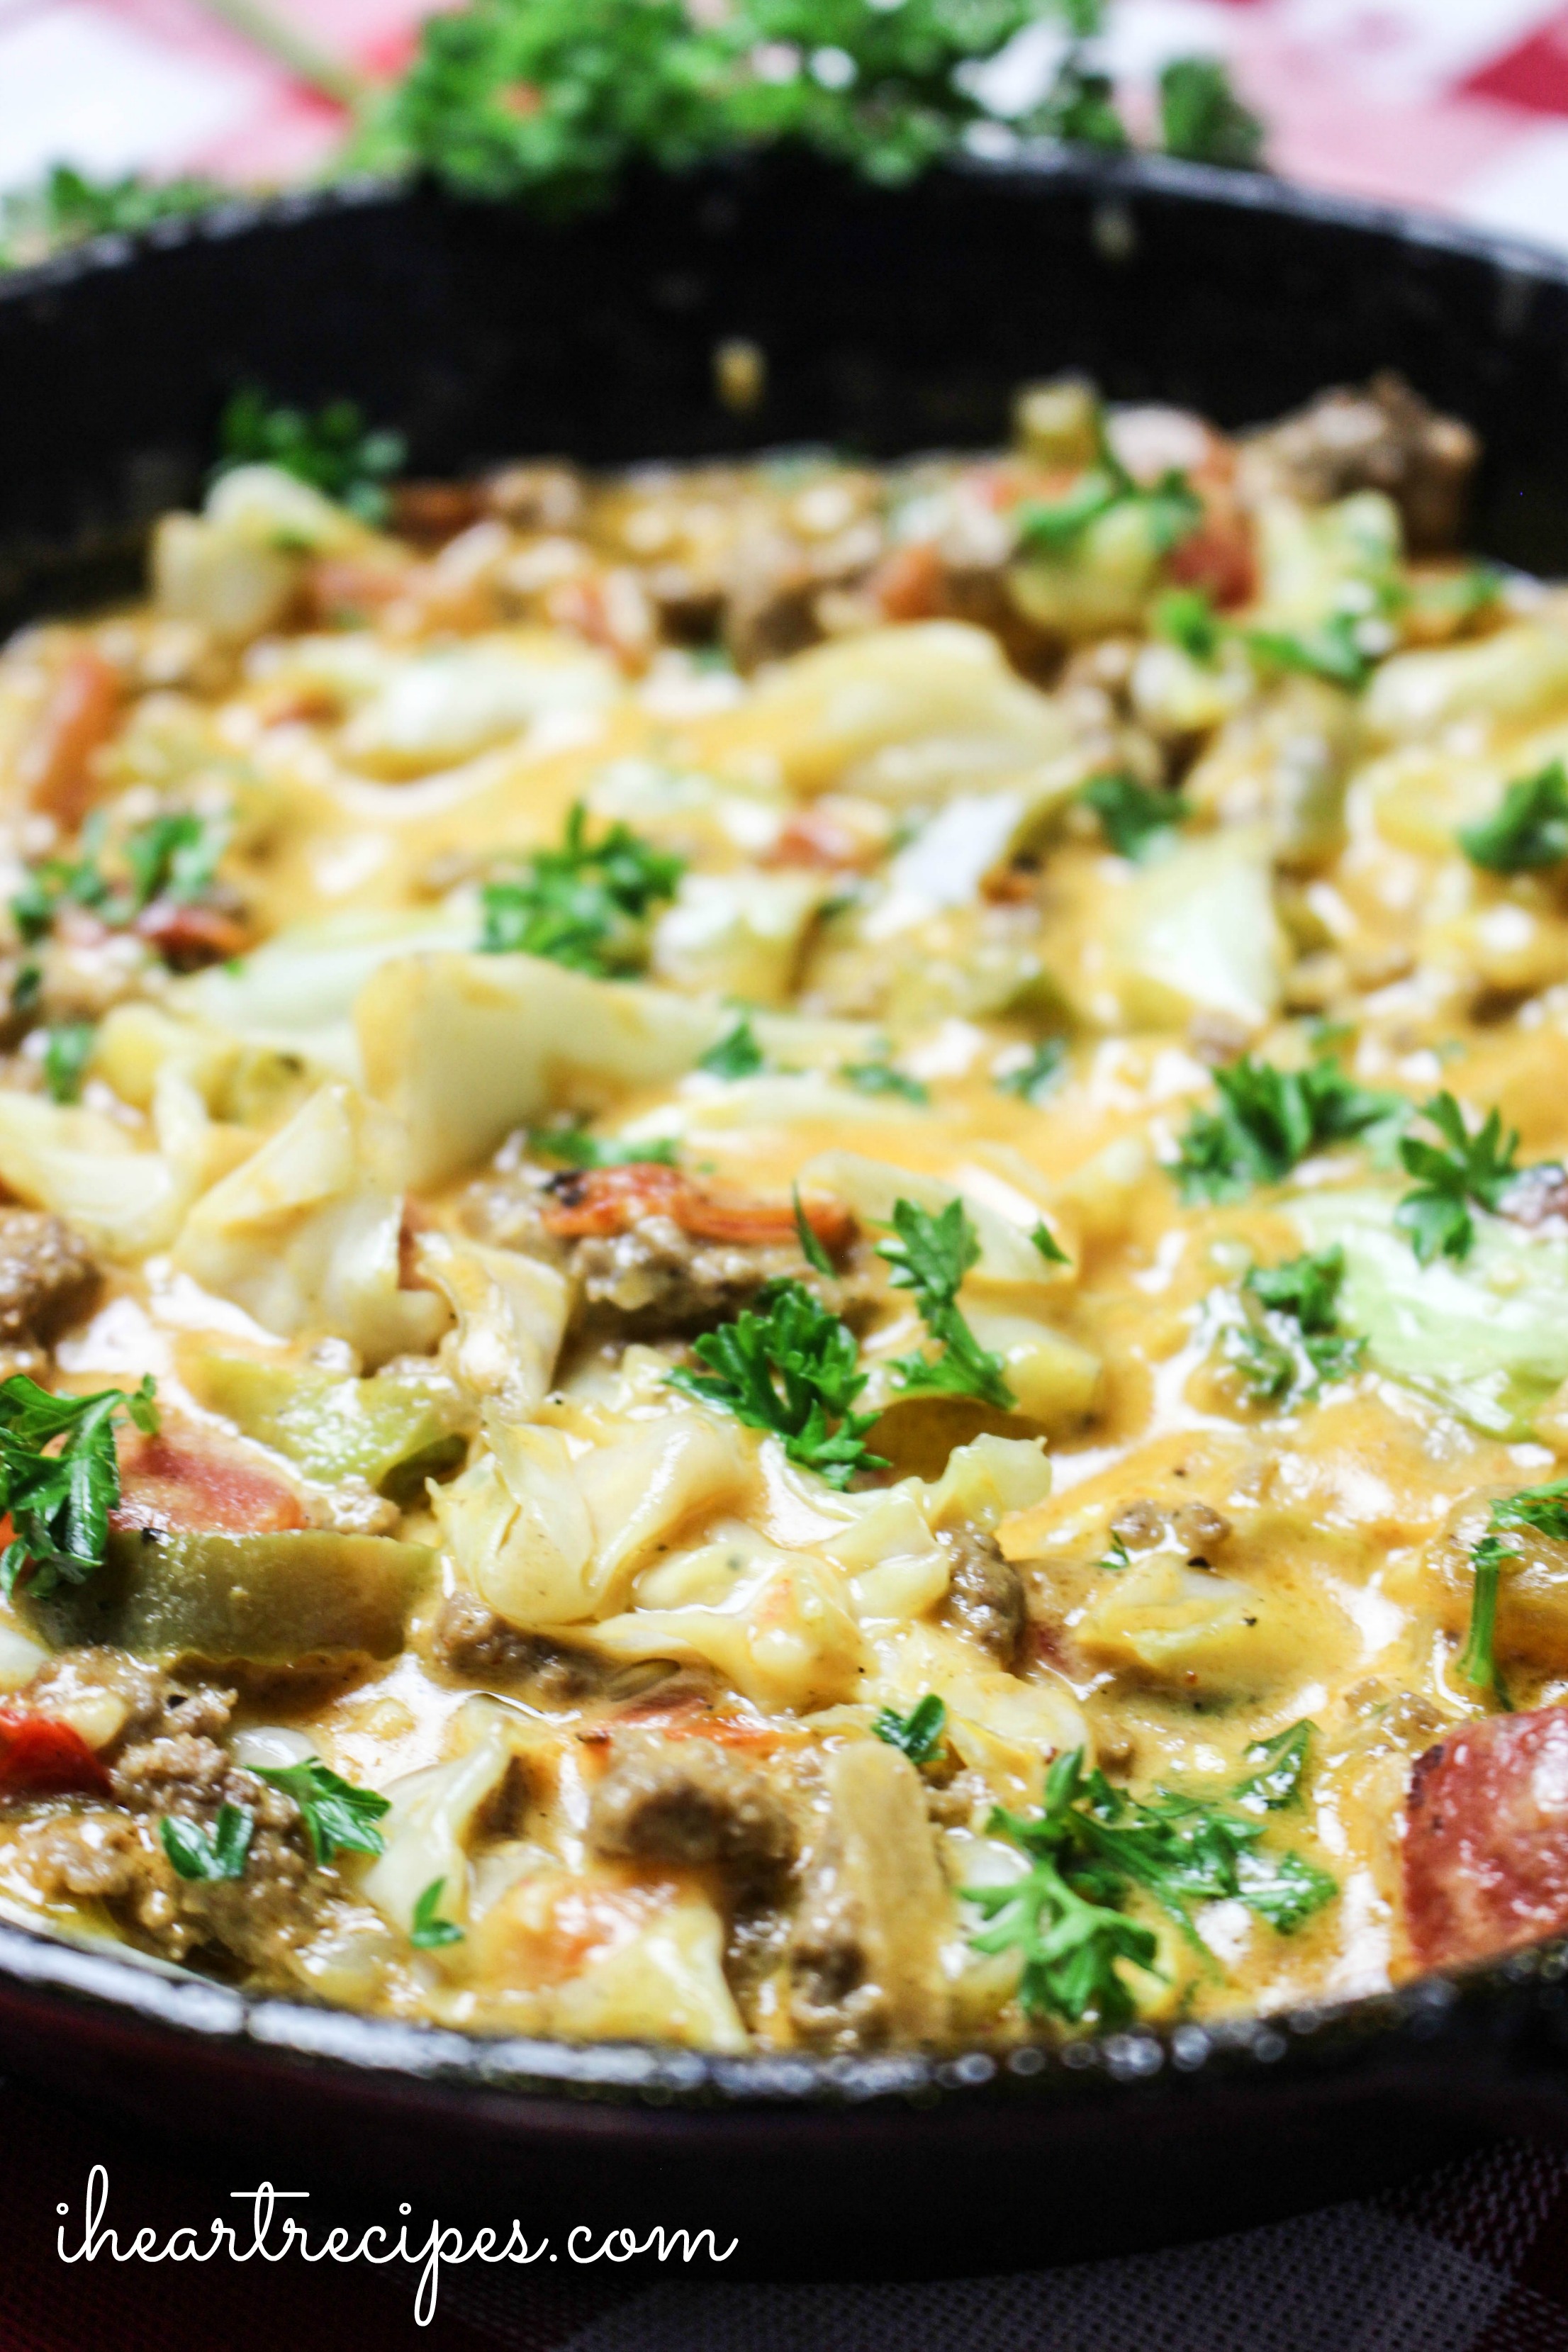 Creamy Cheesy Cabbage Creole topped with fresh green parsley in a cast iron skillet. This is a quick and easy weeknight meal.